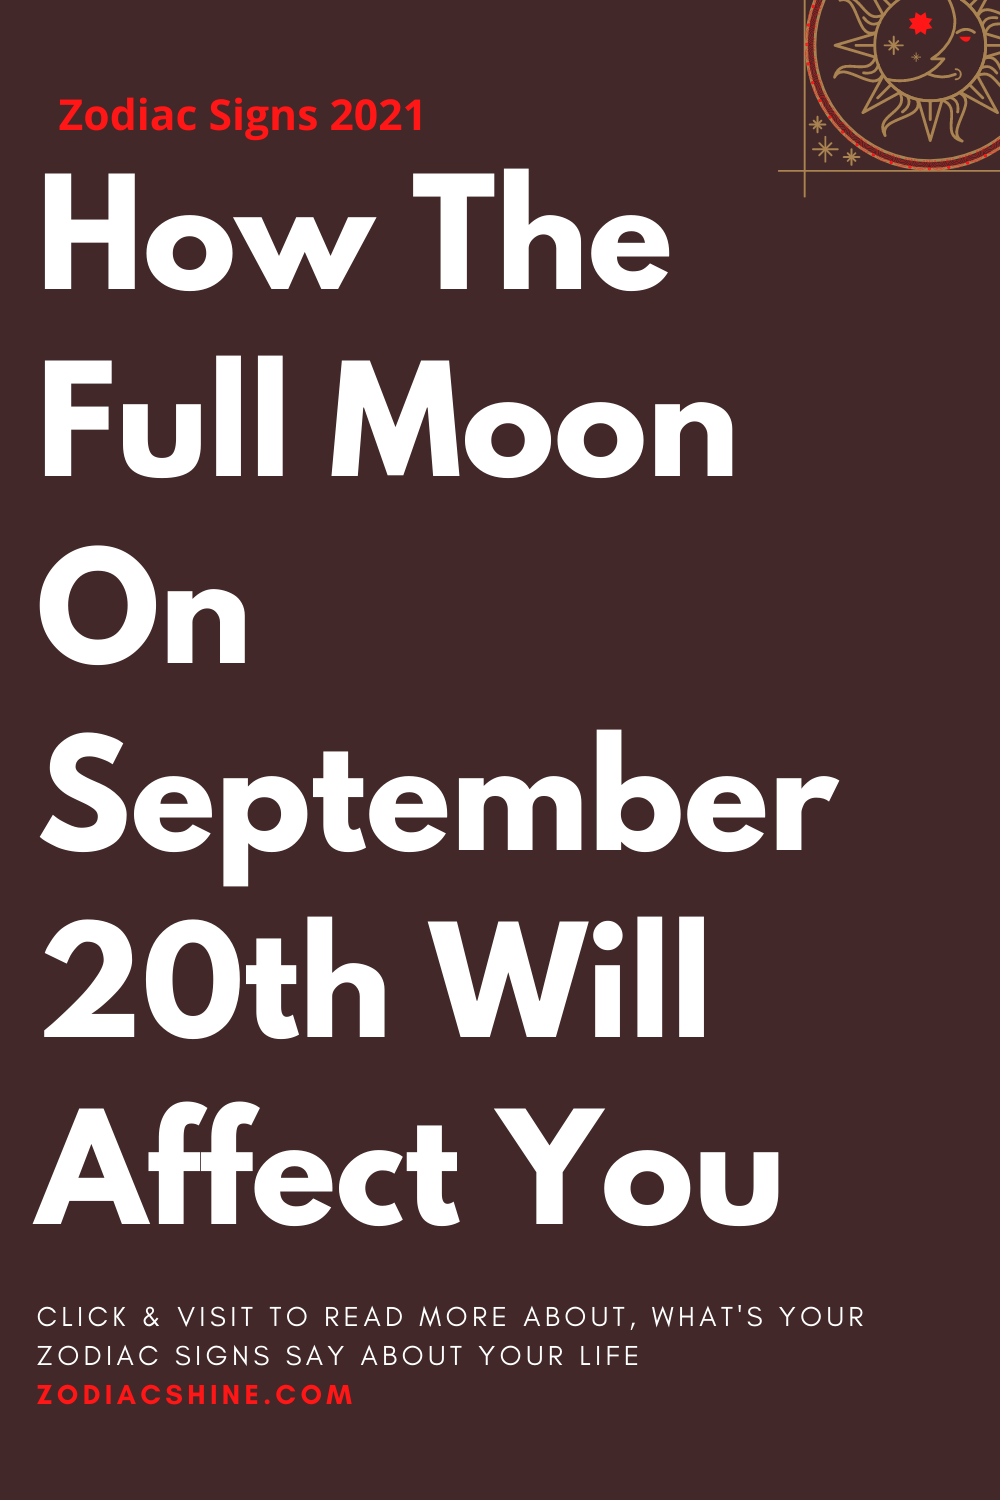 How The Full Moon On September 20th Will Affect You